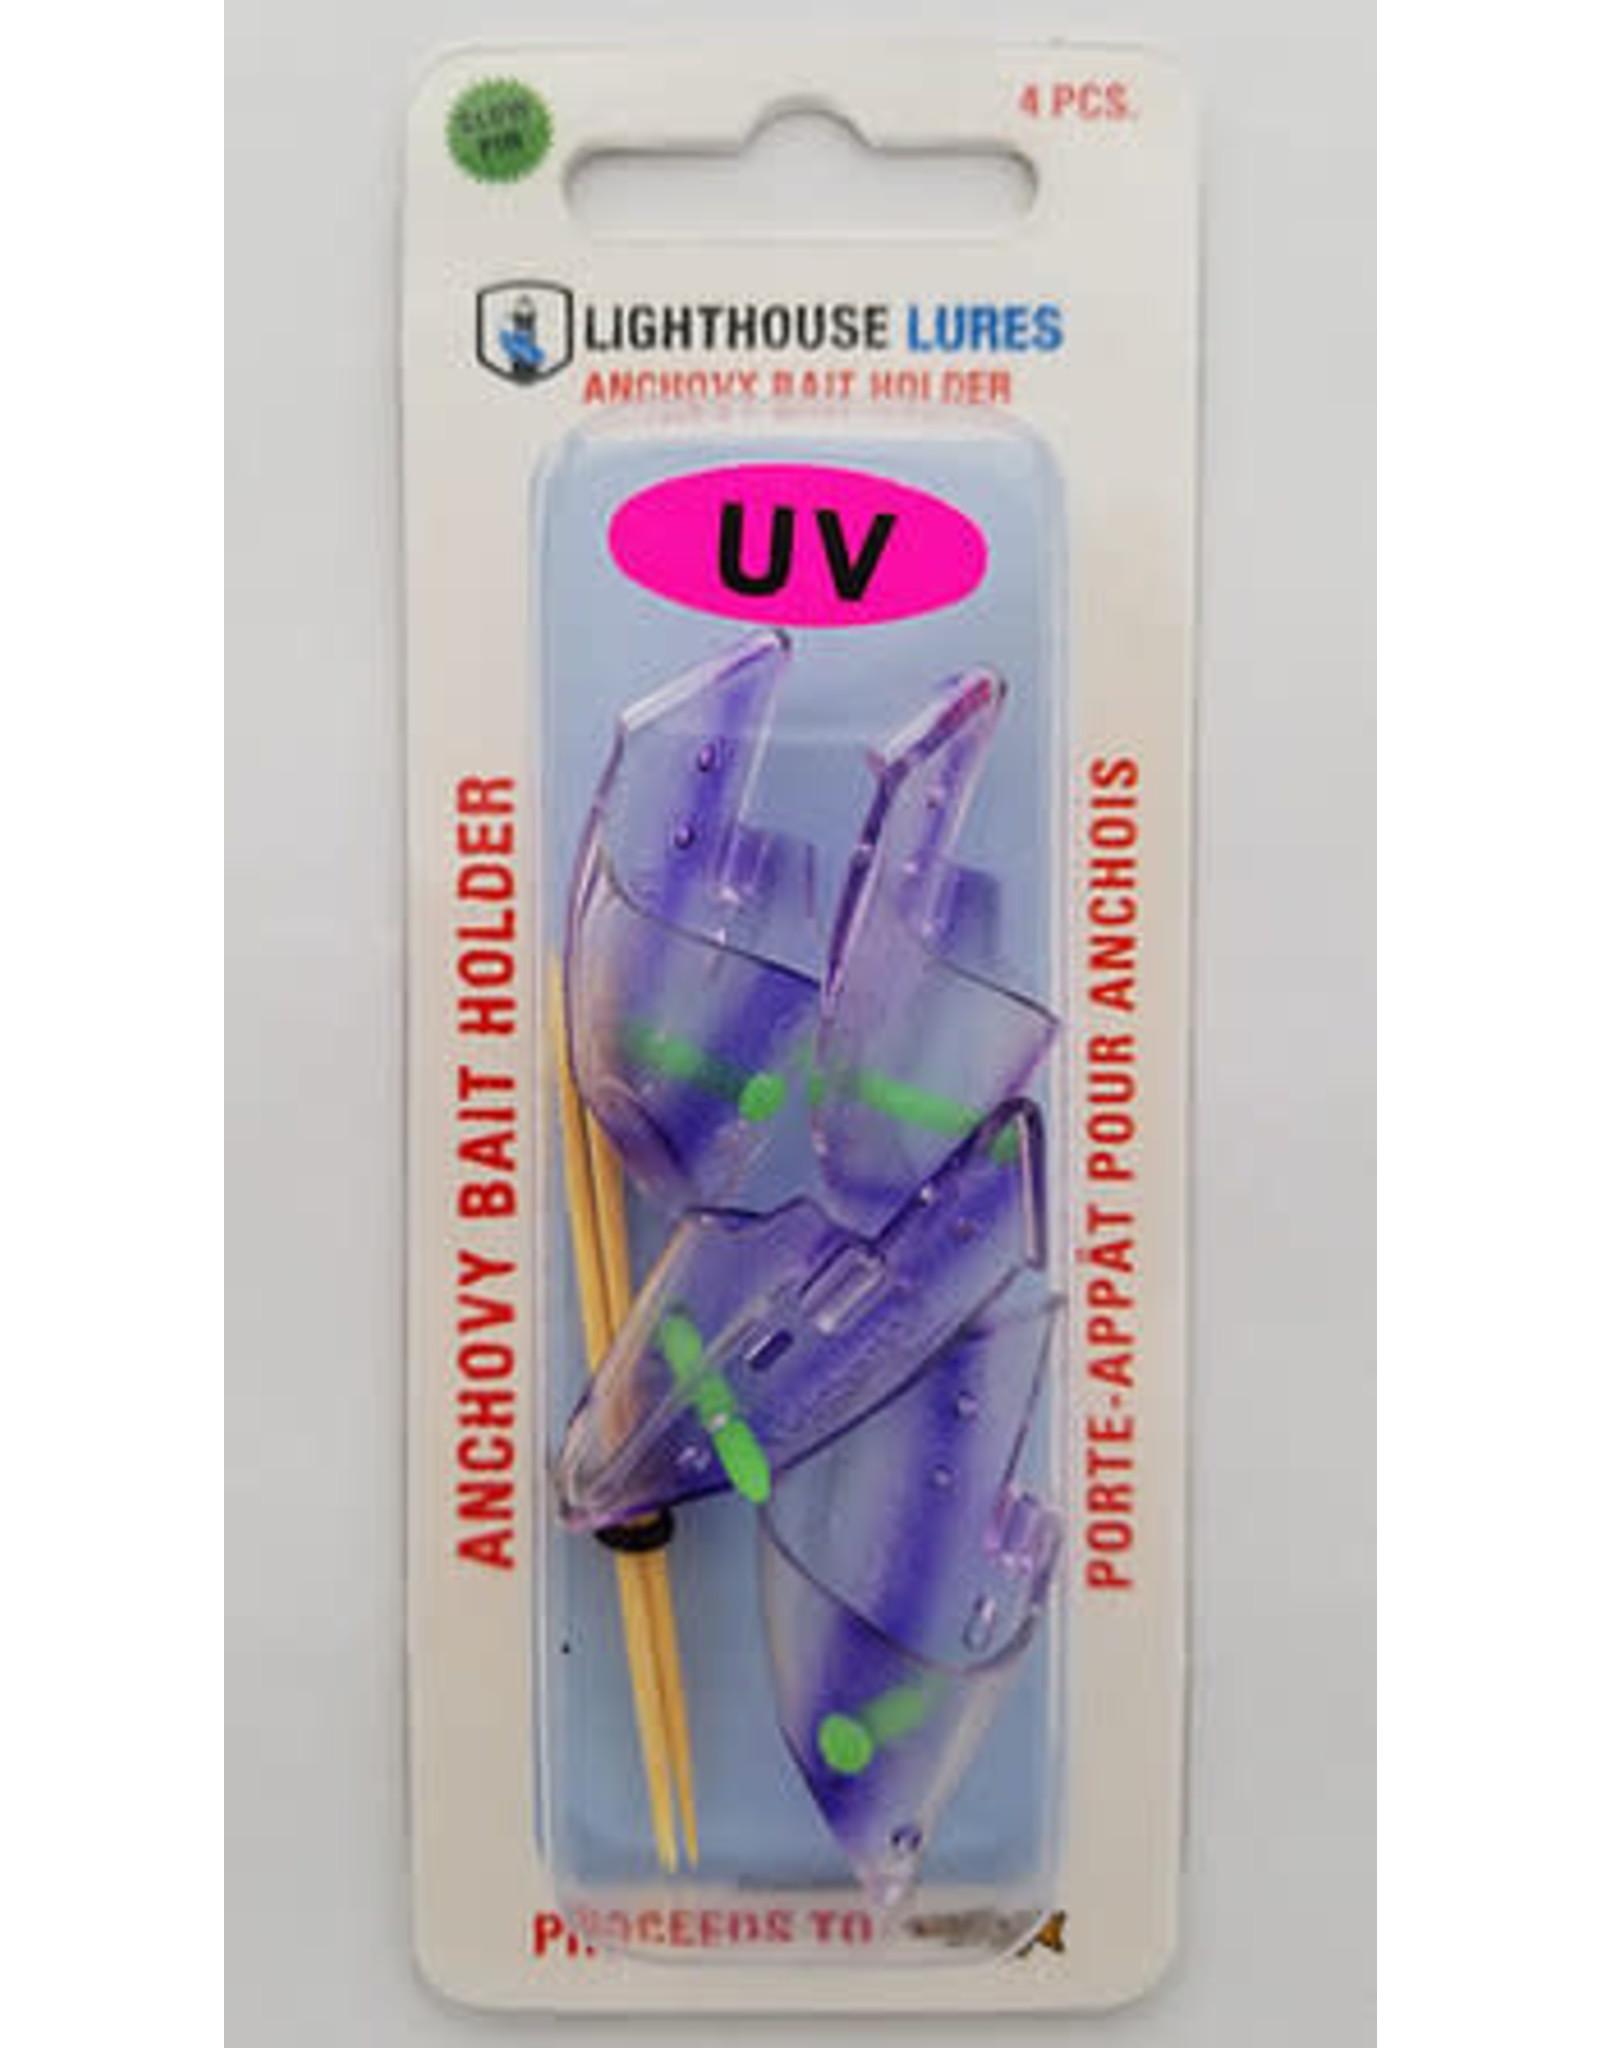 LIGHTHOUSE LURES LIGHTHOUSE ANCHOVY BAIT HOLDER 4 PK